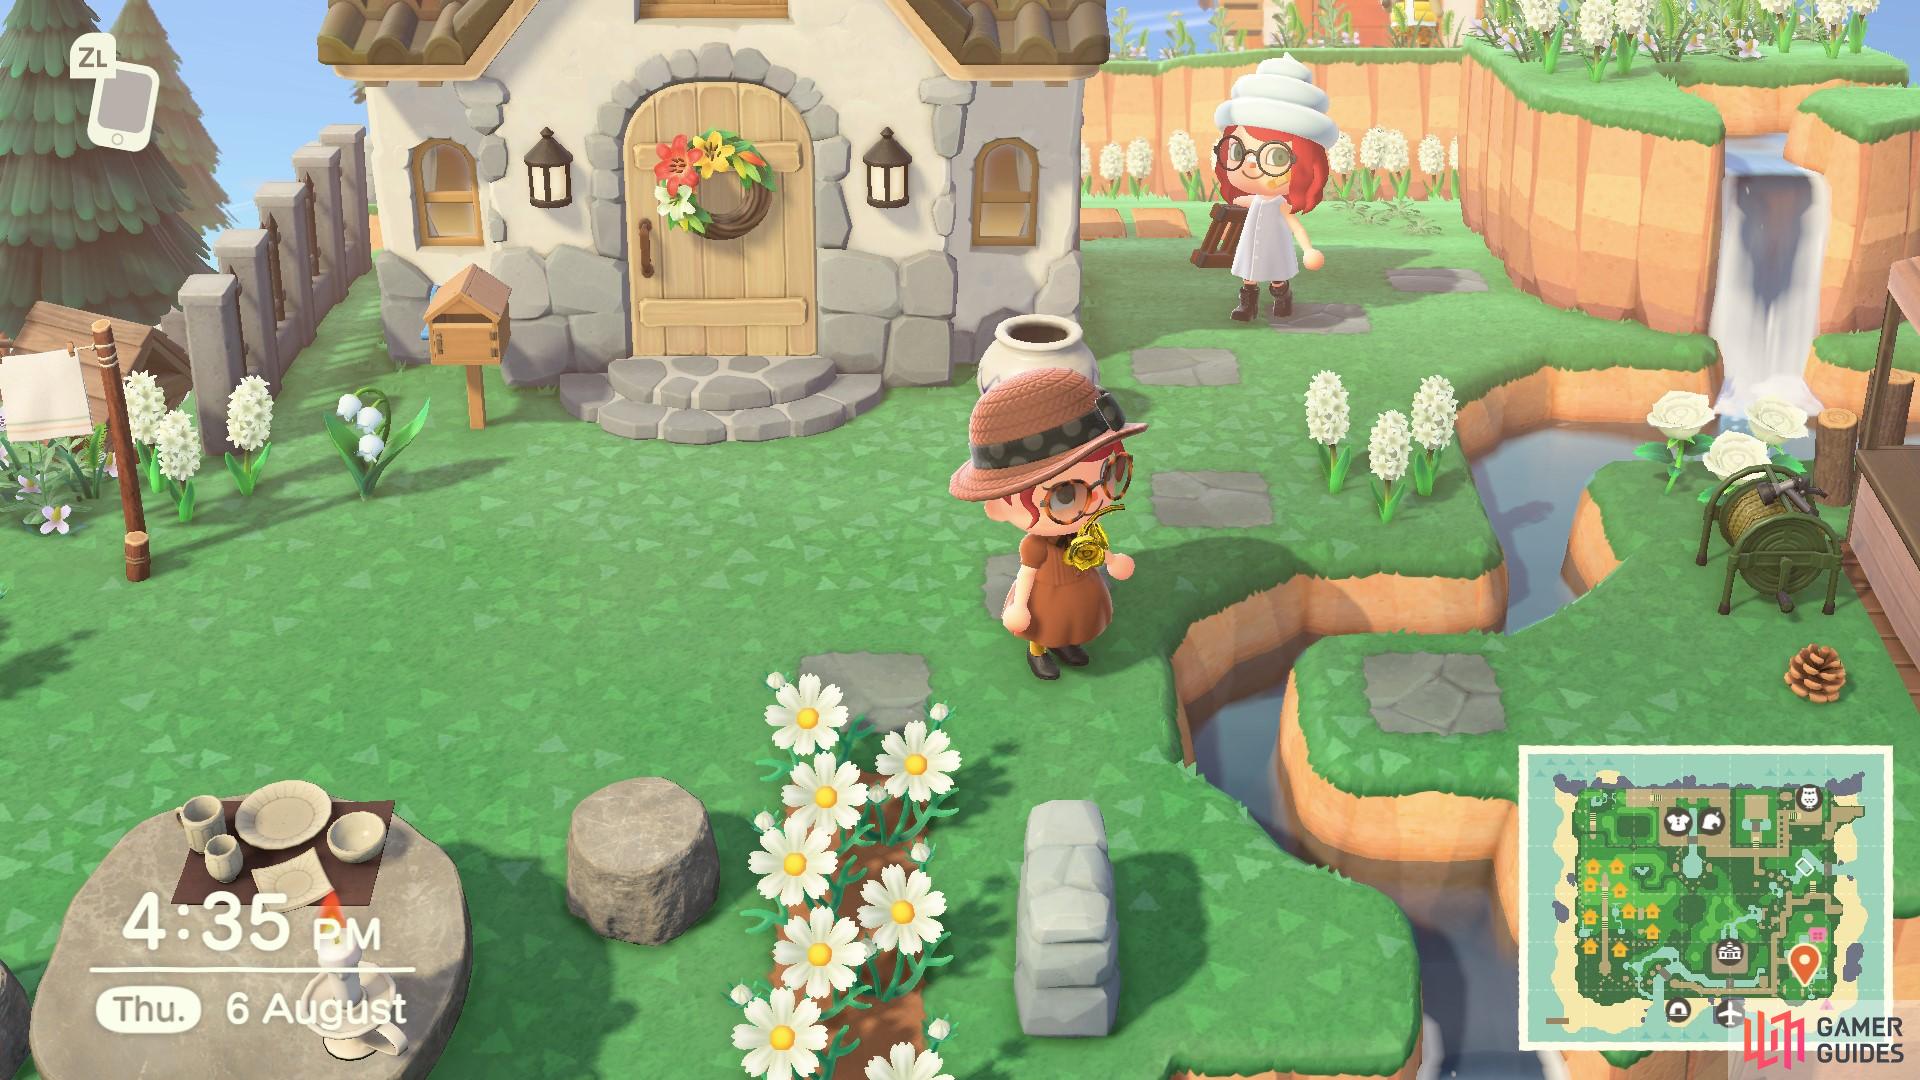 Playing with others is one of the main attractions of Animal Crossing.